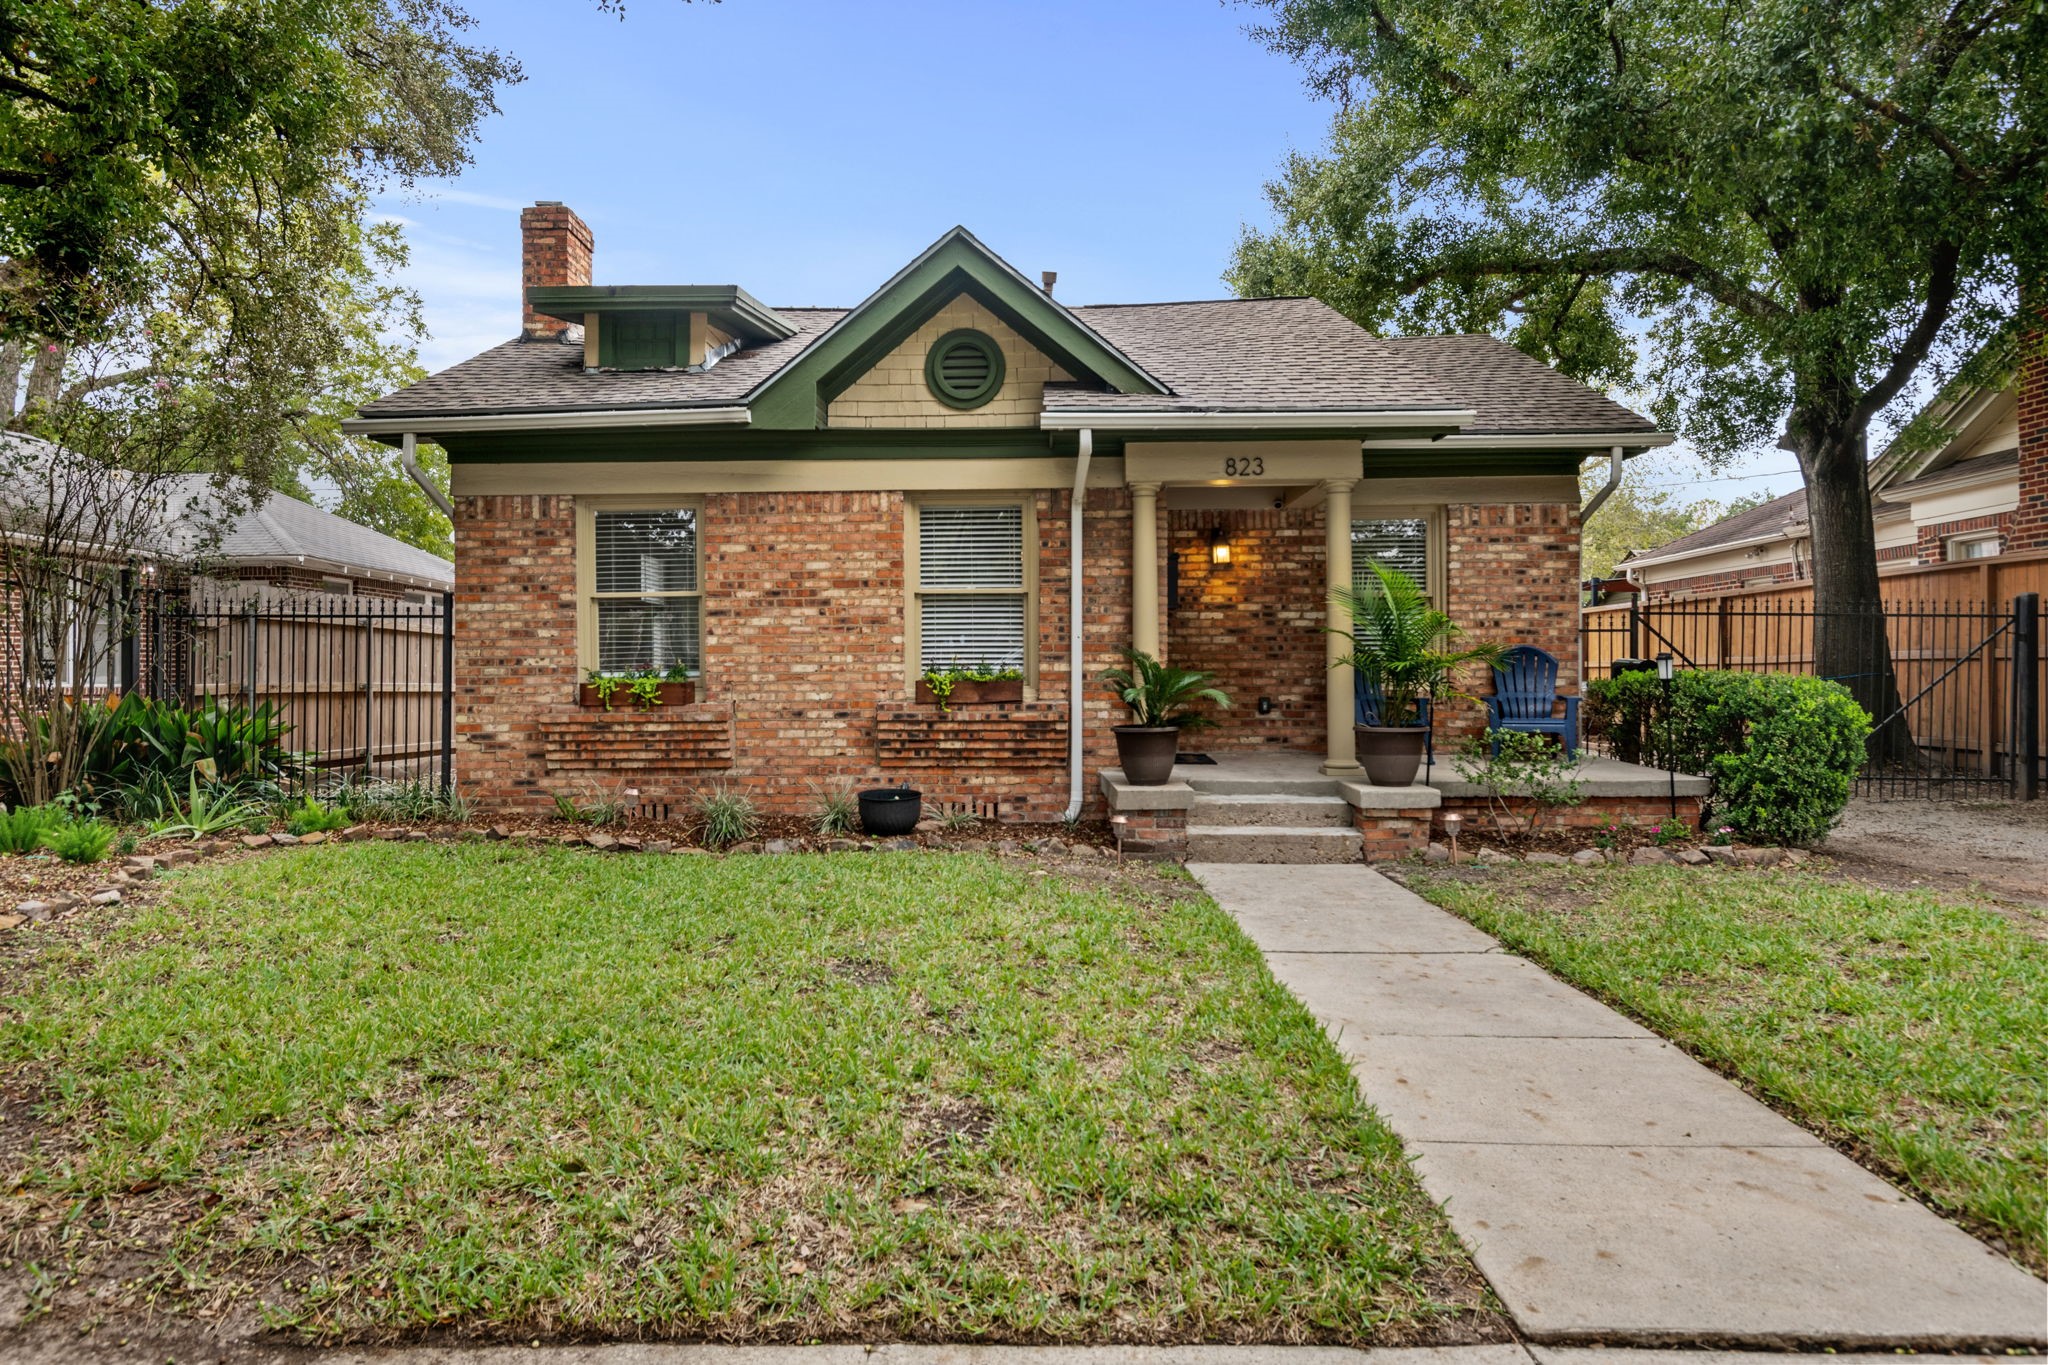 Welcome home to 821 Pizer Street in the Historic East Norhill section of the Heights!